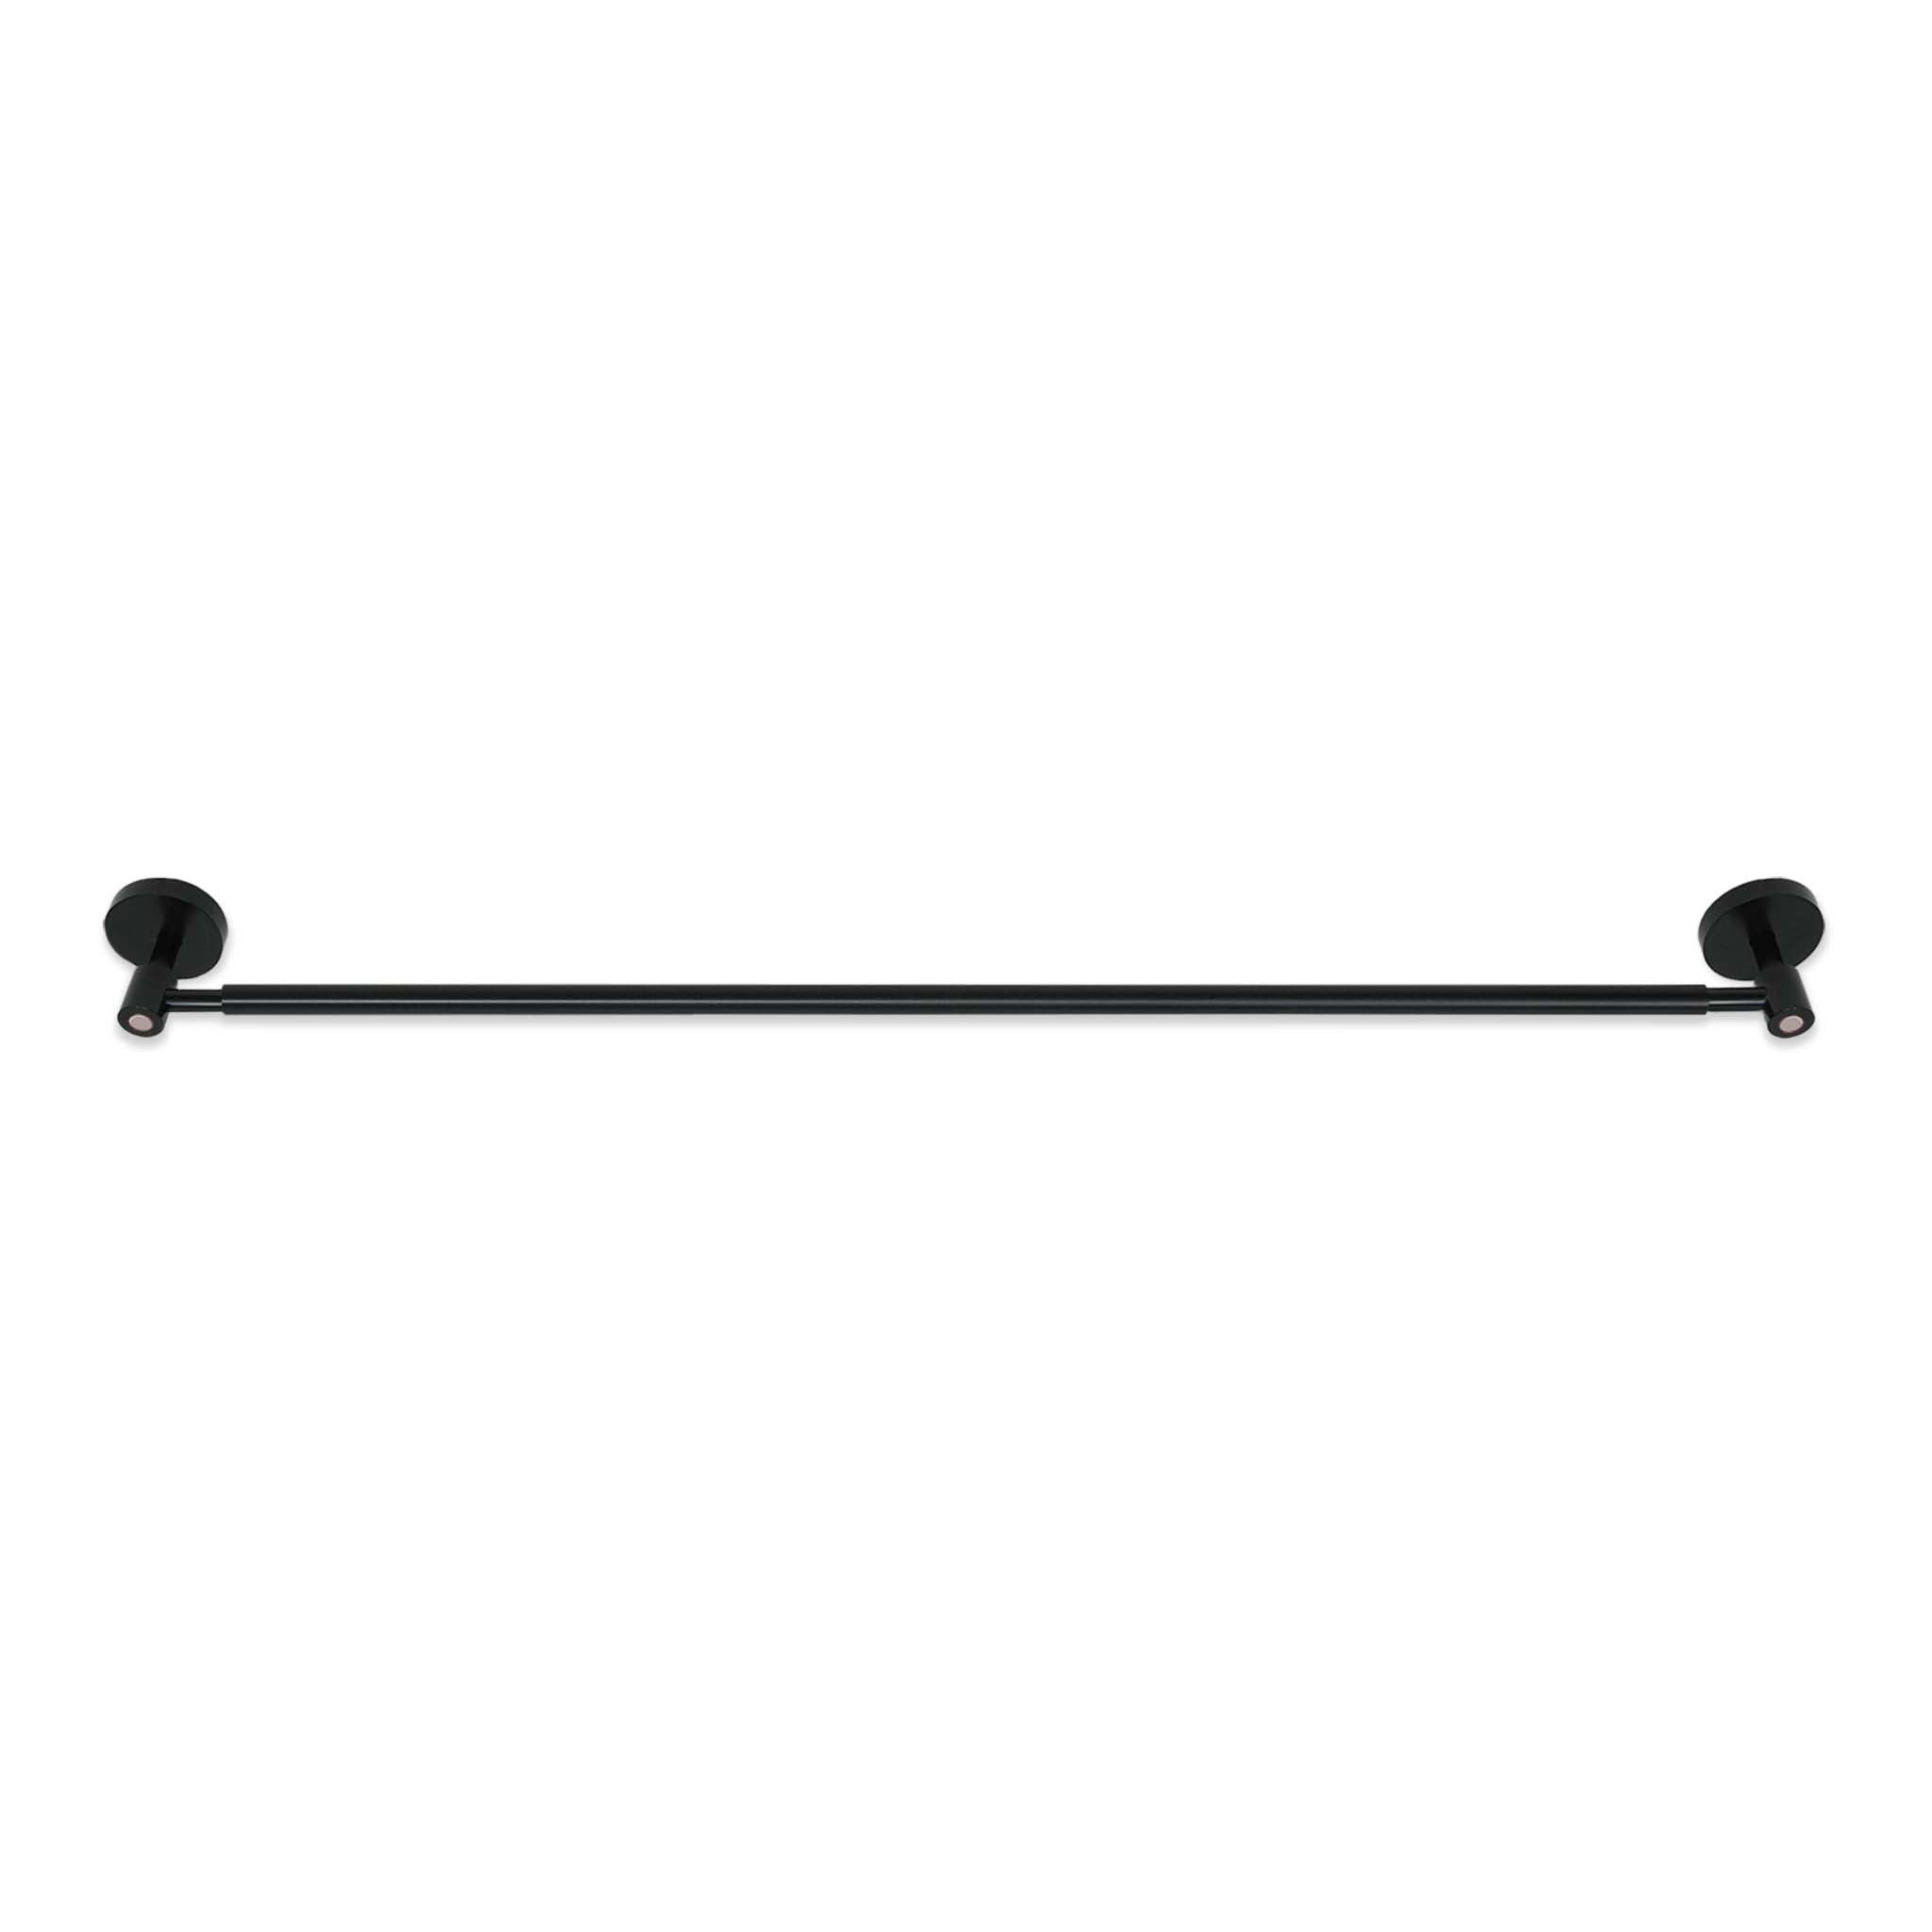 Black and barely color Head towel bar 24" Dutton Brown hardware